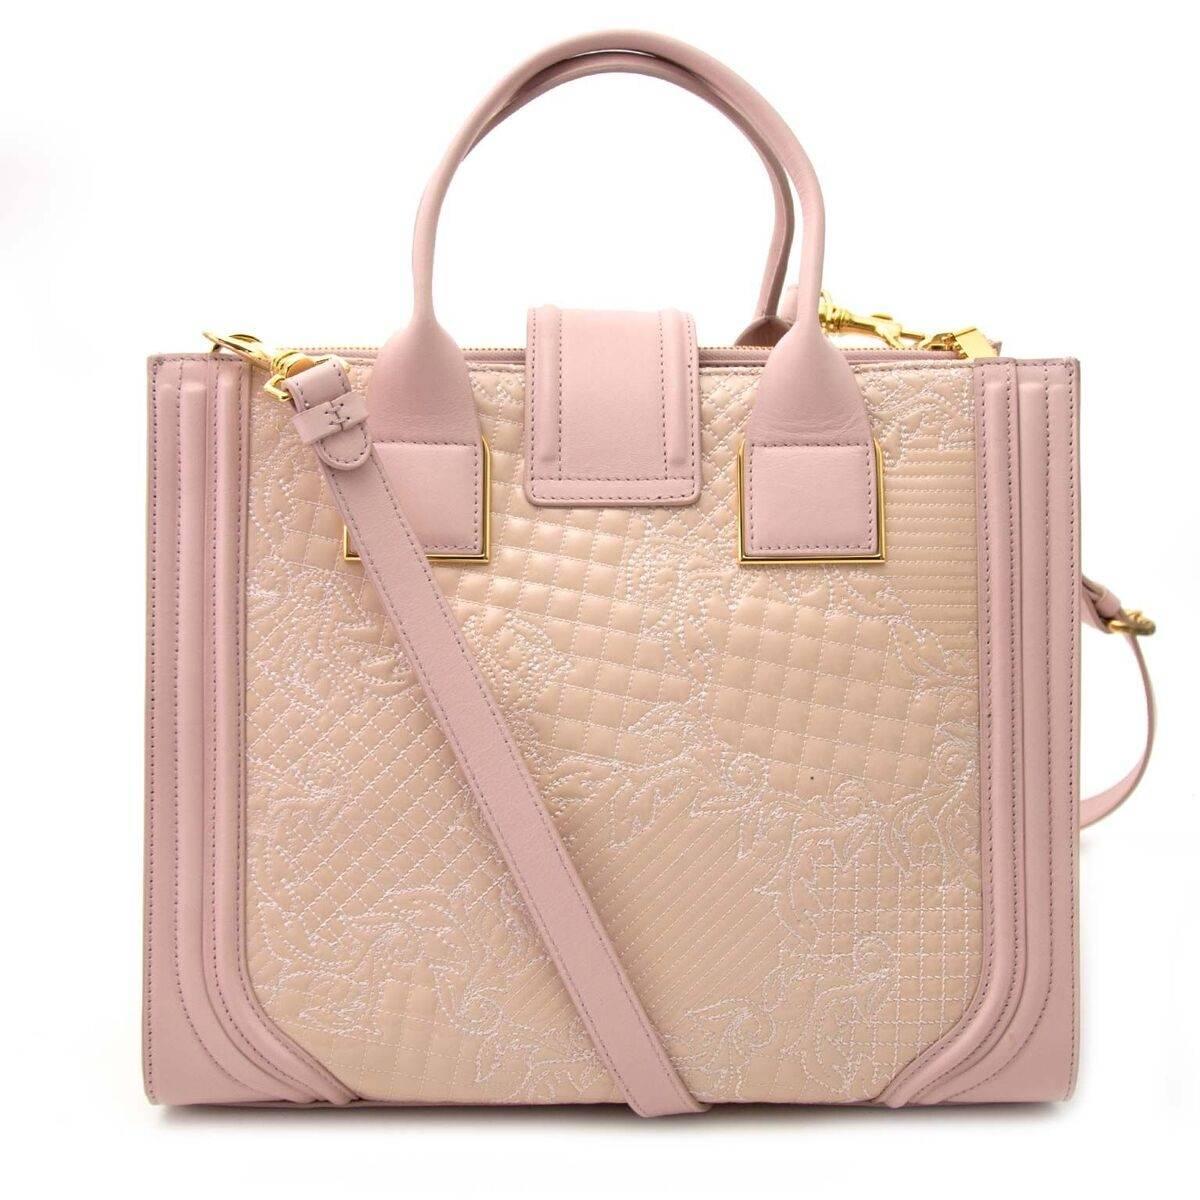 As new!

Versace Pink Powder Icon Quilted And Patent Leather Bag

This iconic Versace bag comes in quilted pink and patent leather.
It's classic chic and refined style will be perfect for the upcomming warmer weather.
The shiny patent and quilted